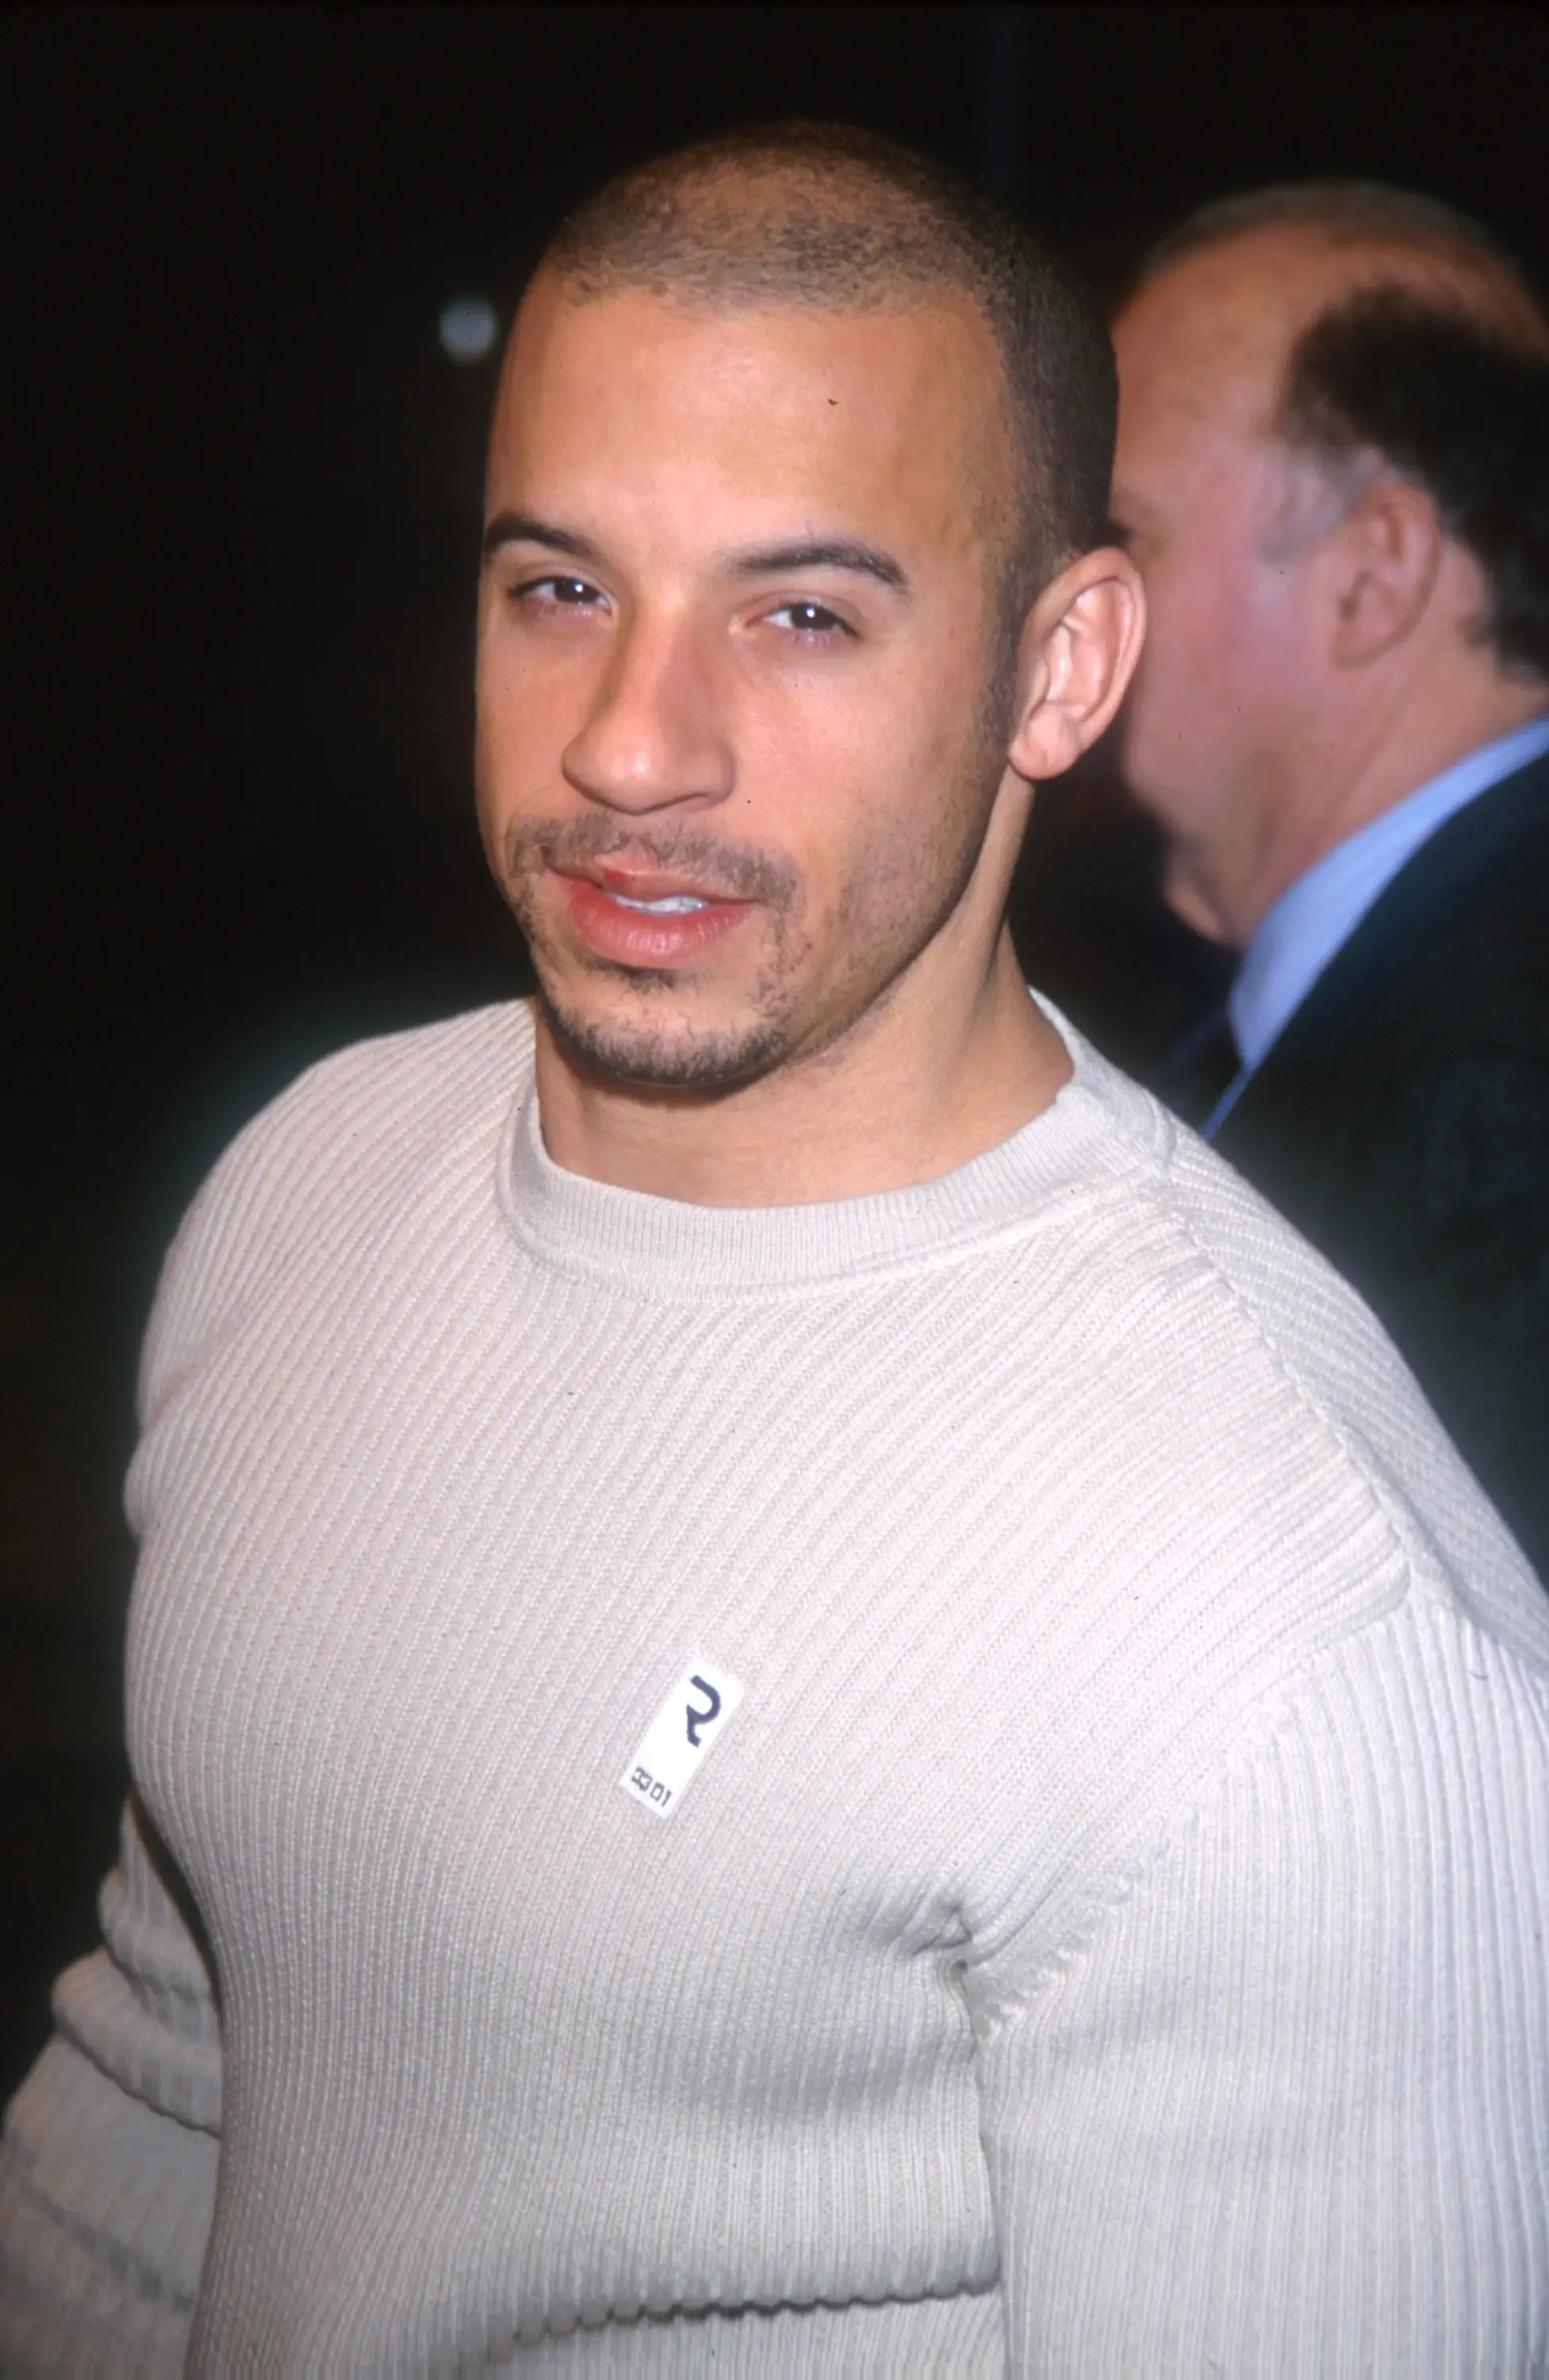 height and weight of vin diesel - Sheridan Theavalogy